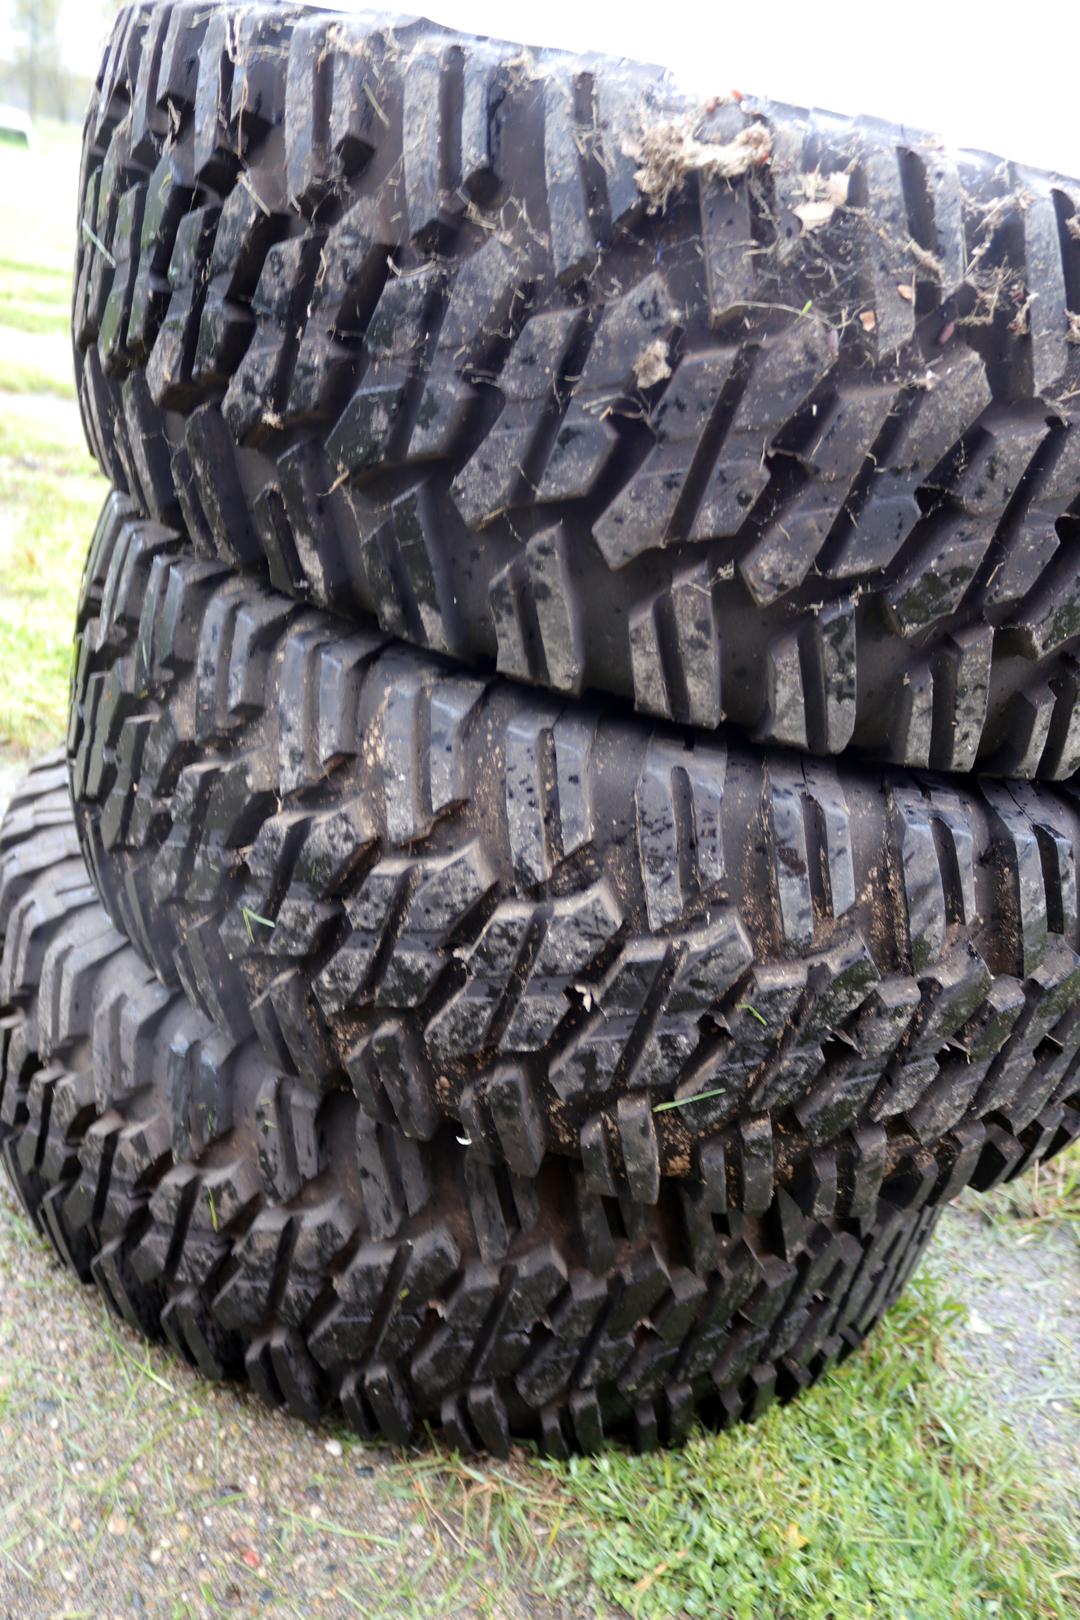 (3) GOOD YEAR 35X12.5 R15 LP TIRES, LIKE NEW